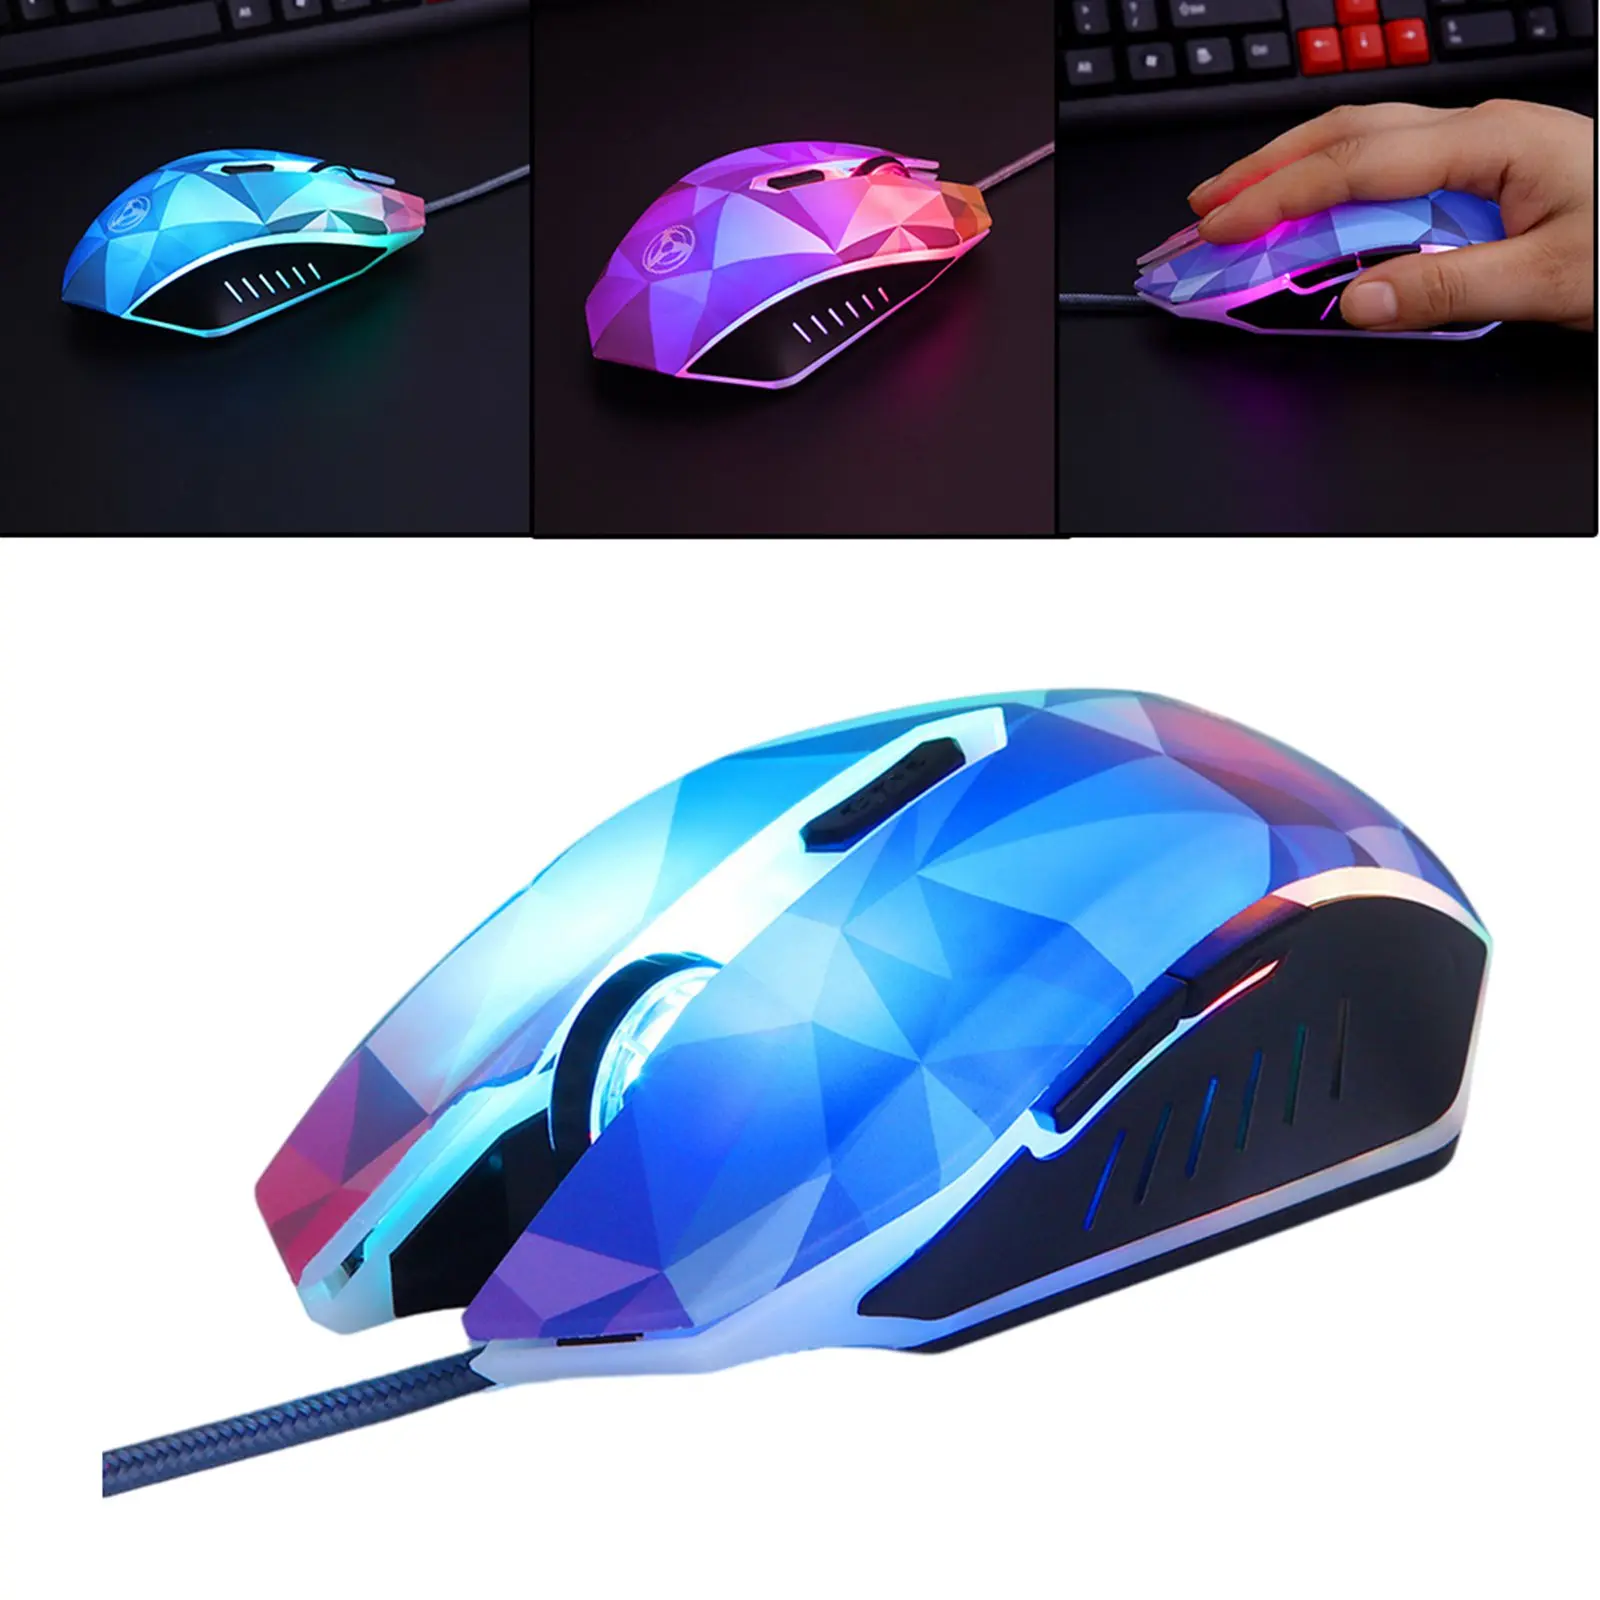 Game Wired Mice USB Cable Computer Desktop PC Accessories Ergonomic High Performance Plug and Play Gamer Gaming Room Boy